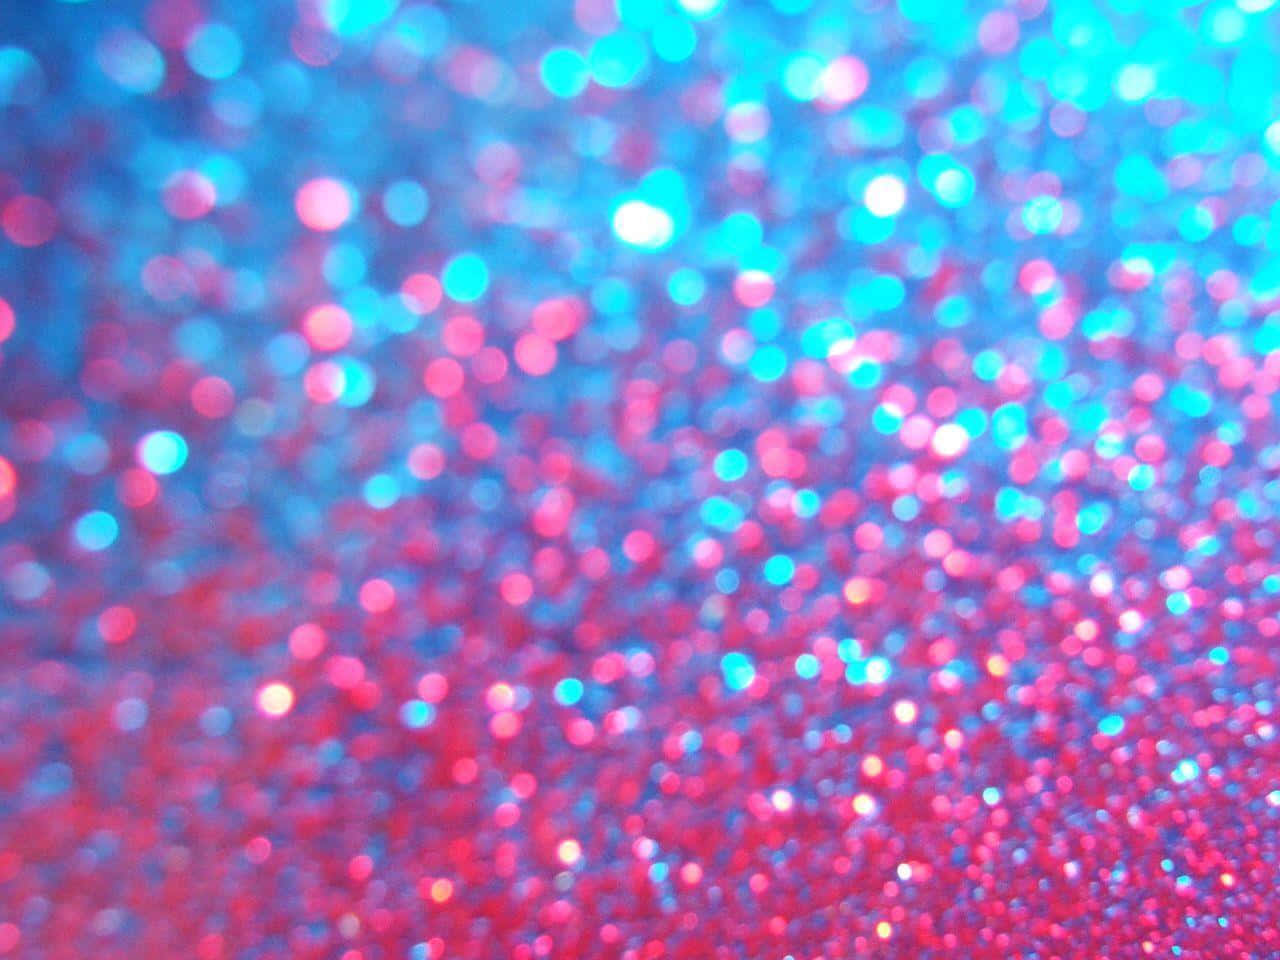 Download A Close Up Of A Blue And Pink Glitter Background | Wallpapers.com